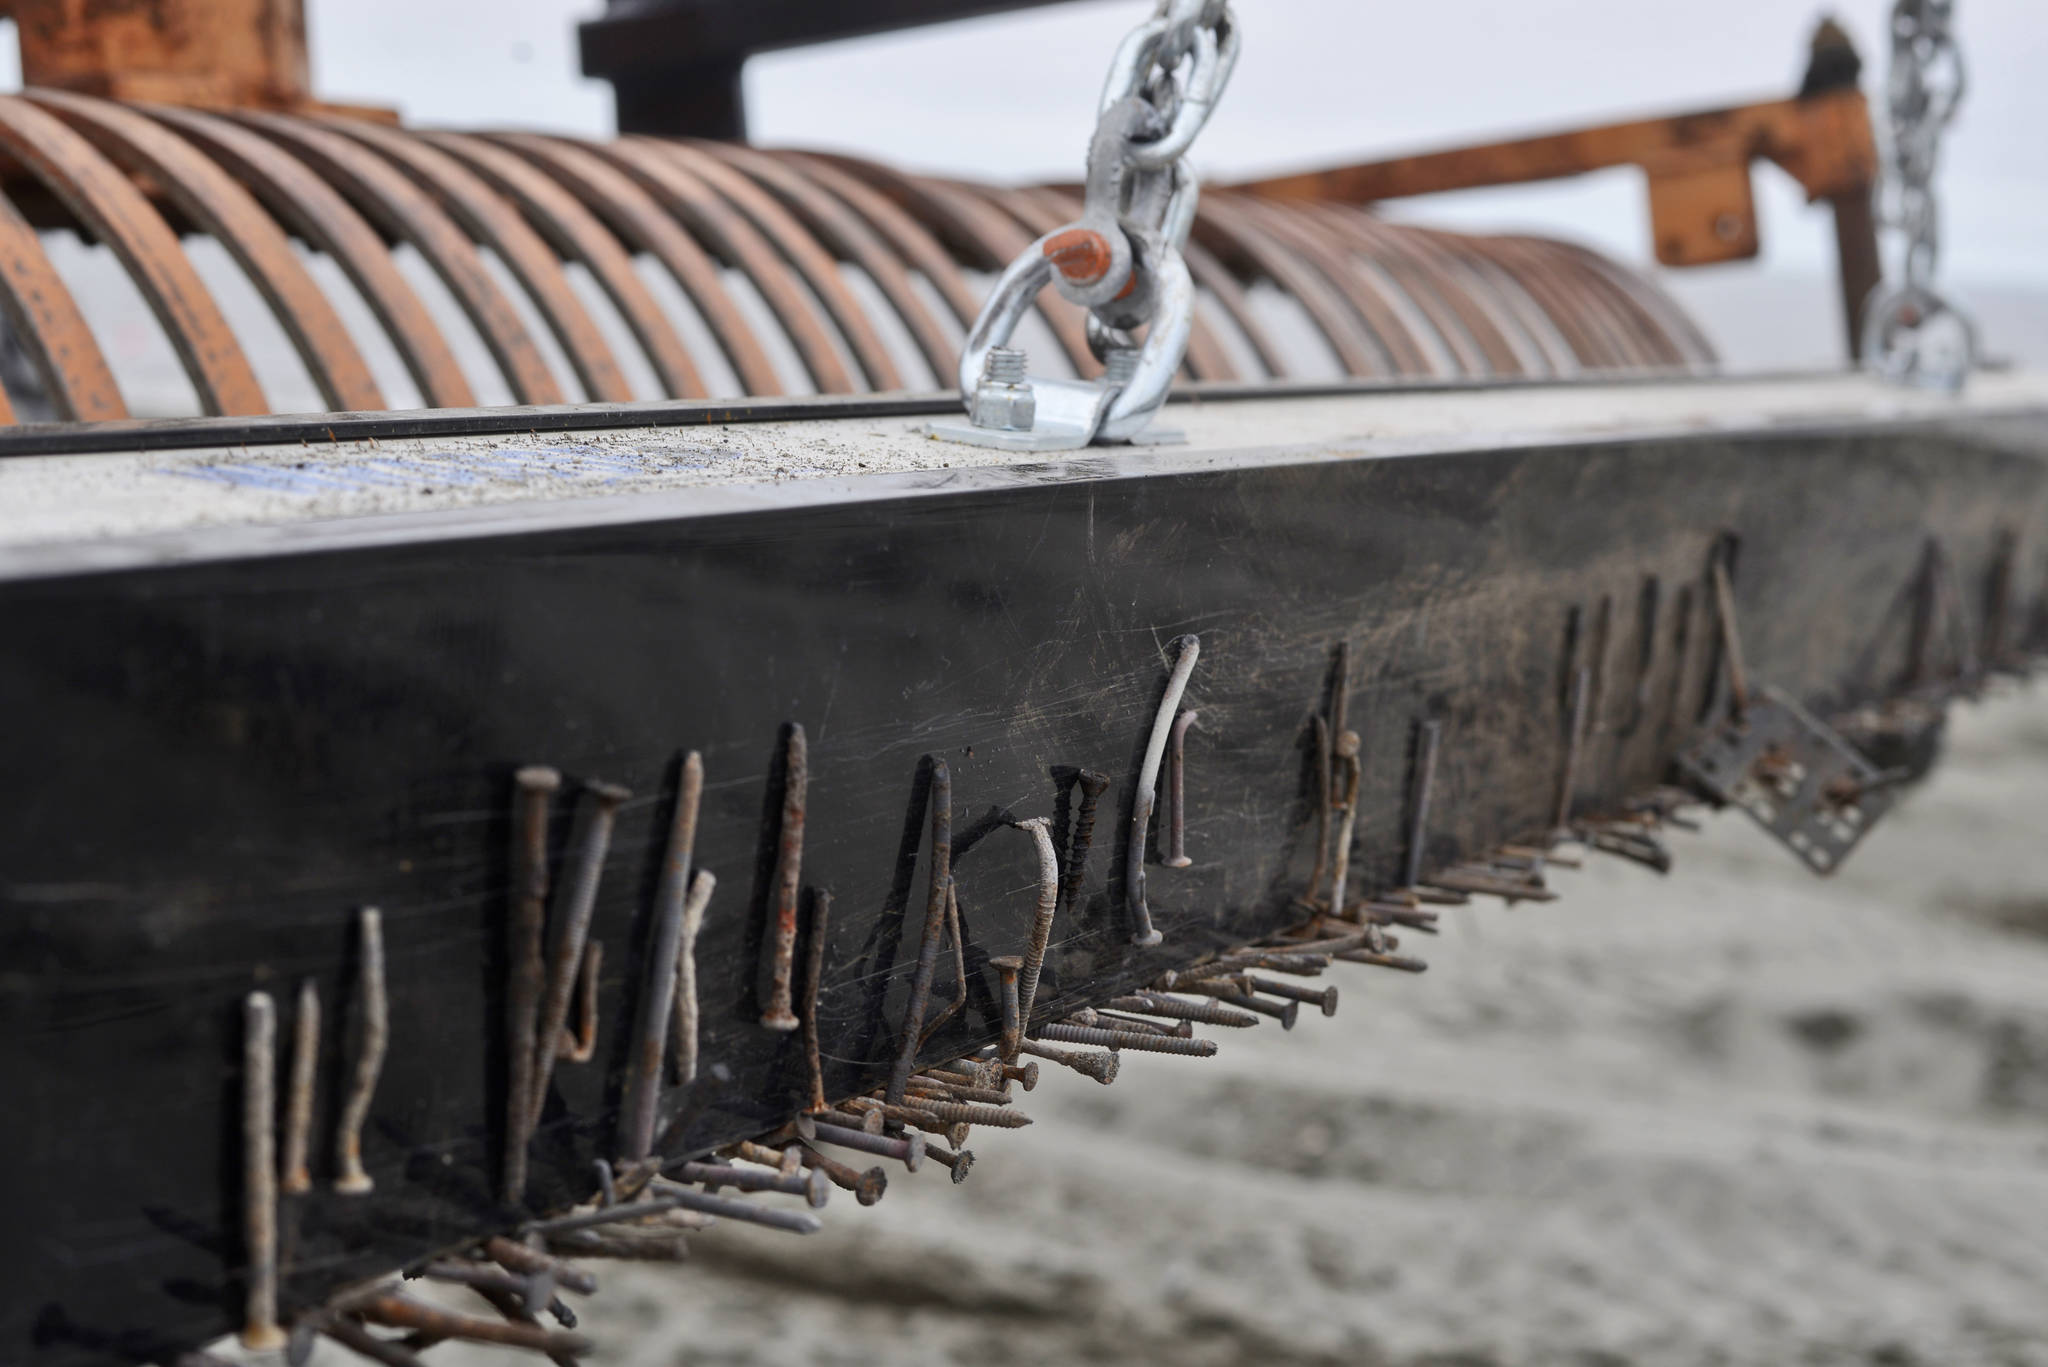 A variety of nails, screws, and staples pulled from the sand of Kenai’s south beach are stuck to a magnetic bar hanging behind a Kenai Parks and Recreation Department tractor rake on Friday, July 20, 2018 in Kenai, Alaska. Kenai shop foreman Randy Parrish, who built the adjustable chain suspension system, said the magnet can pick up a nail from eight inches away, making it able to pick up nails buried deep in the sand when hung low. (Ben Boettger/Peninsula Clarion)